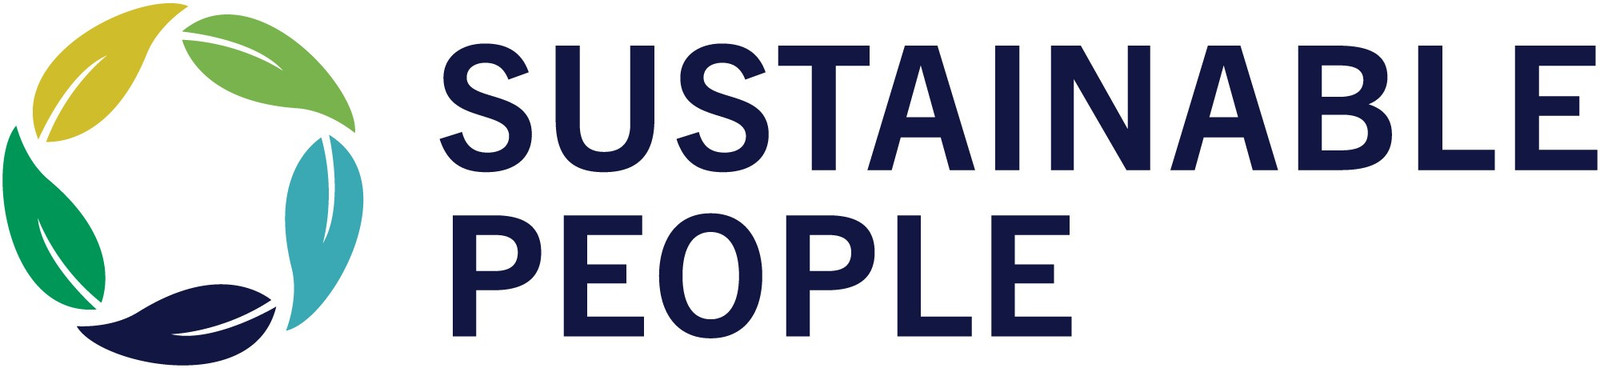 Sustainable People As